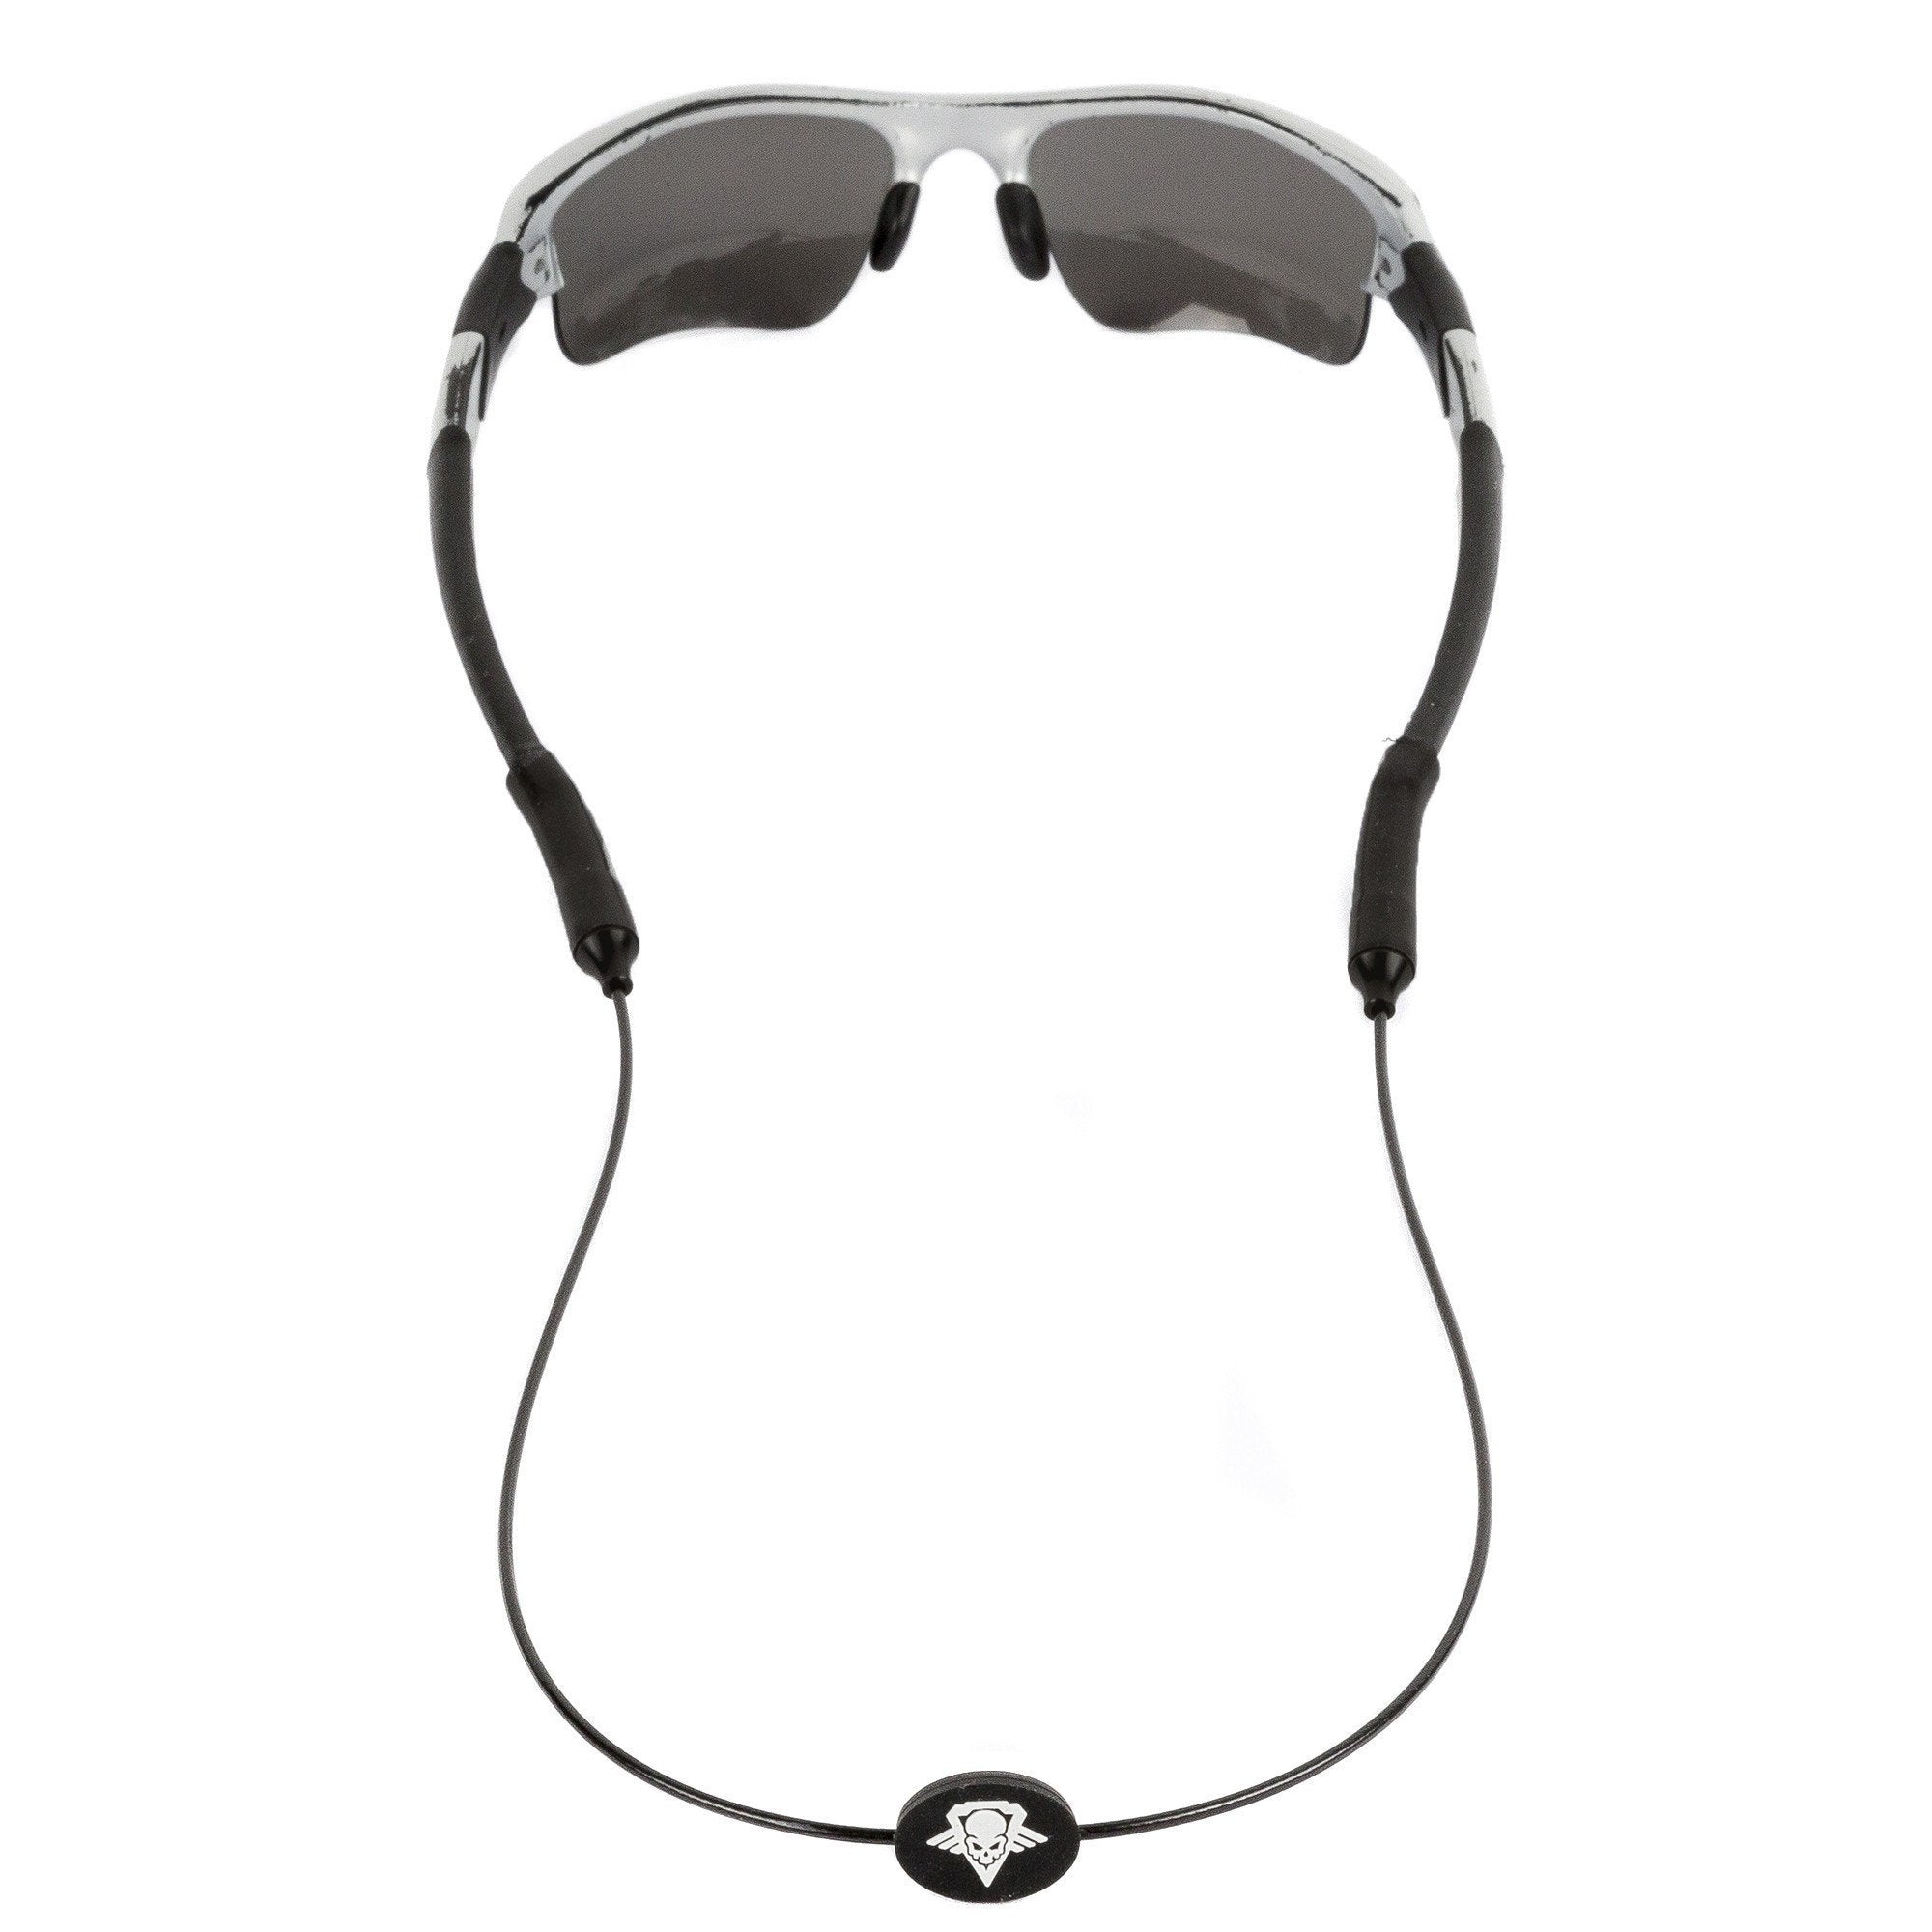 https://relentless-tactical.com/cdn/shop/products/relentless-tactical-tactical-accessories-tac-strapz-glasses-retainer-system-universal-fit-for-any-shooting-safety-or-sunglasses-standard-black-25350500493_2000x.jpg?v=1612896590